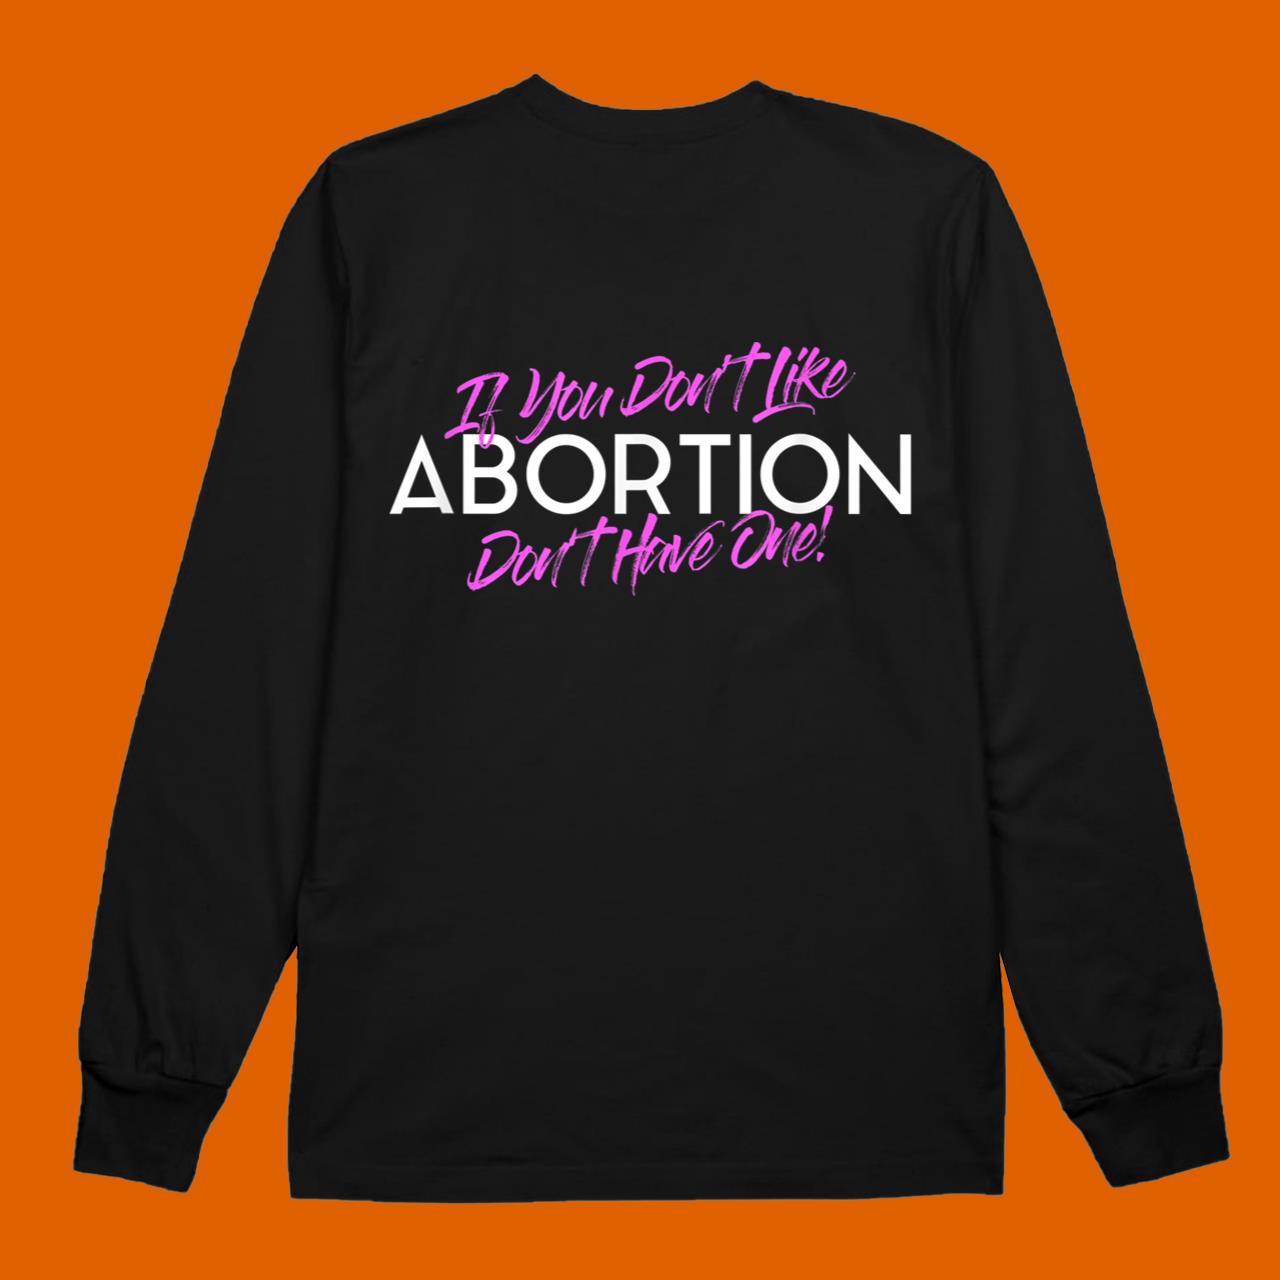 If You Don’t Like Abortion Don’t Have One – Pro Choice T-Shirt